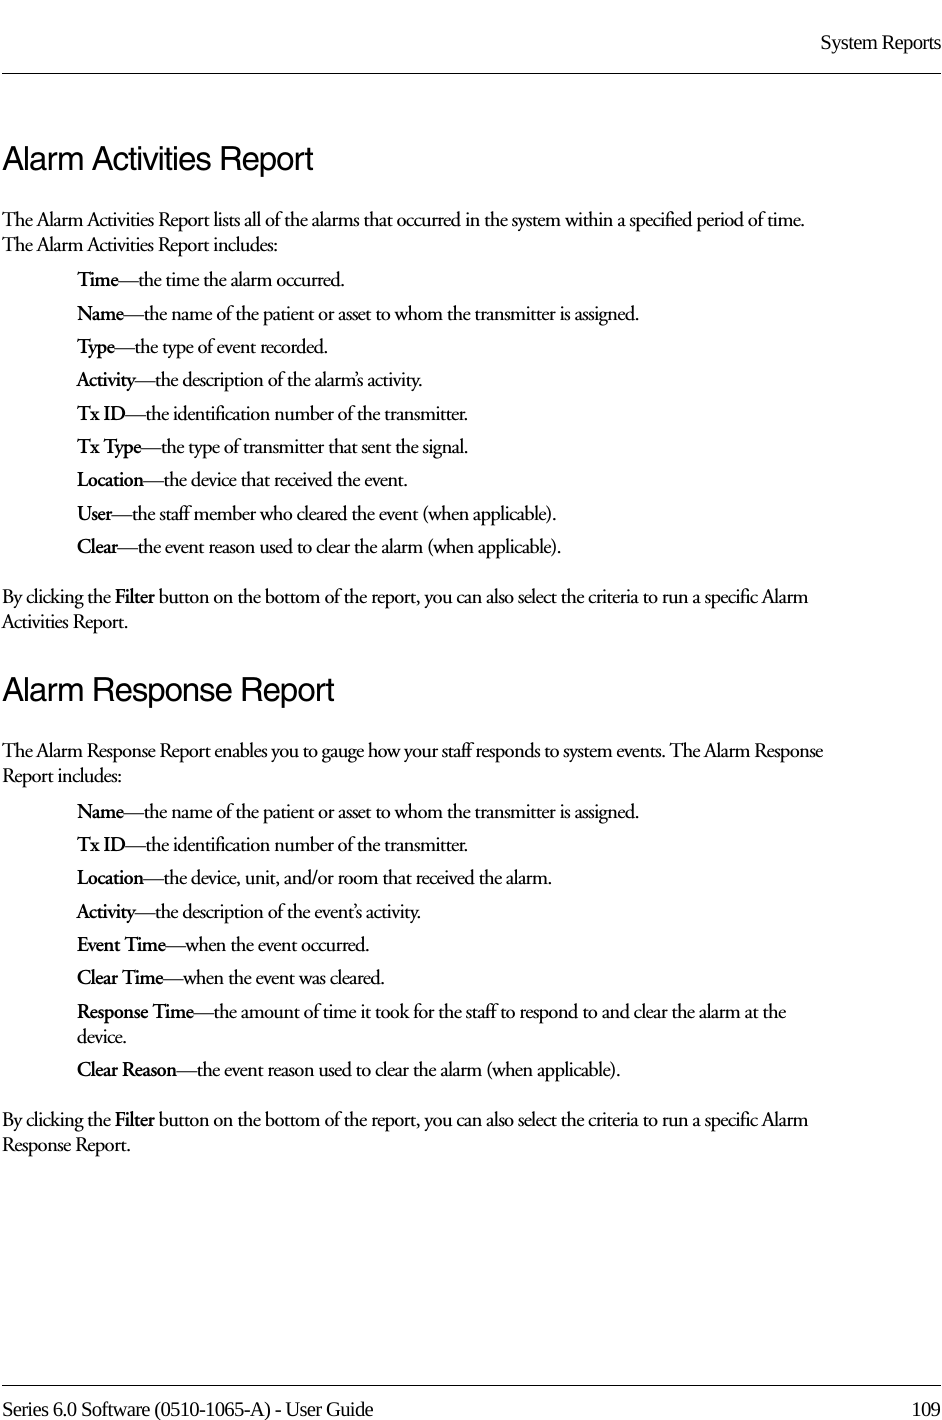 Series 6.0 Software (0510-1065-A) - User Guide  109System ReportsAlarm Activities ReportThe Alarm Activities Report lists all of the alarms that occurred in the system within a specified period of time. The Alarm Activities Report includes:Time—the time the alarm occurred.Name—the name of the patient or asset to whom the transmitter is assigned. Type—the type of event recorded.Activity—the description of the alarm’s activity.Tx ID—the identification number of the transmitter.Tx Type—the type of transmitter that sent the signal.Location—the device that received the event.User—the staff member who cleared the event (when applicable).Clear—the event reason used to clear the alarm (when applicable).By clicking the Filter button on the bottom of the report, you can also select the criteria to run a specific Alarm Activities Report.Alarm Response ReportThe Alarm Response Report enables you to gauge how your staff responds to system events. The Alarm Response Report includes:Name—the name of the patient or asset to whom the transmitter is assigned. Tx ID—the identification number of the transmitter. Location—the device, unit, and/or room that received the alarm.Activity—the description of the event’s activity.Event Time—when the event occurred.Clear Time—when the event was cleared.Response Time—the amount of time it took for the staff to respond to and clear the alarm at the device.Clear Reason—the event reason used to clear the alarm (when applicable).By clicking the Filter button on the bottom of the report, you can also select the criteria to run a specific Alarm Response Report.